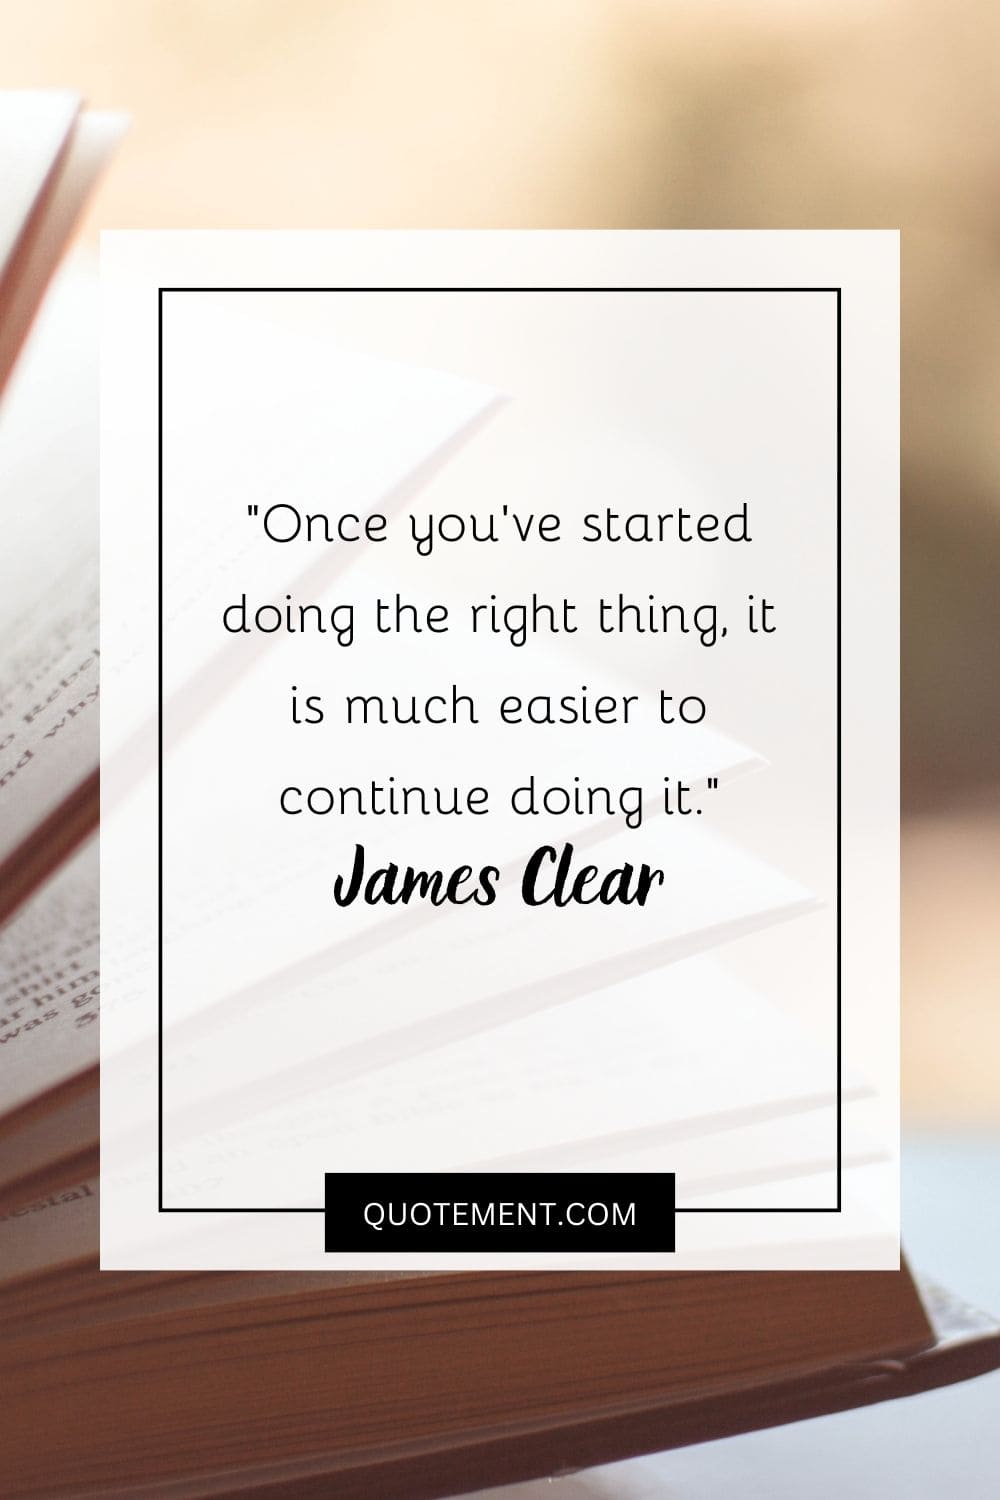 Once you’ve started doing the right thing, it is much easier to continue doing it